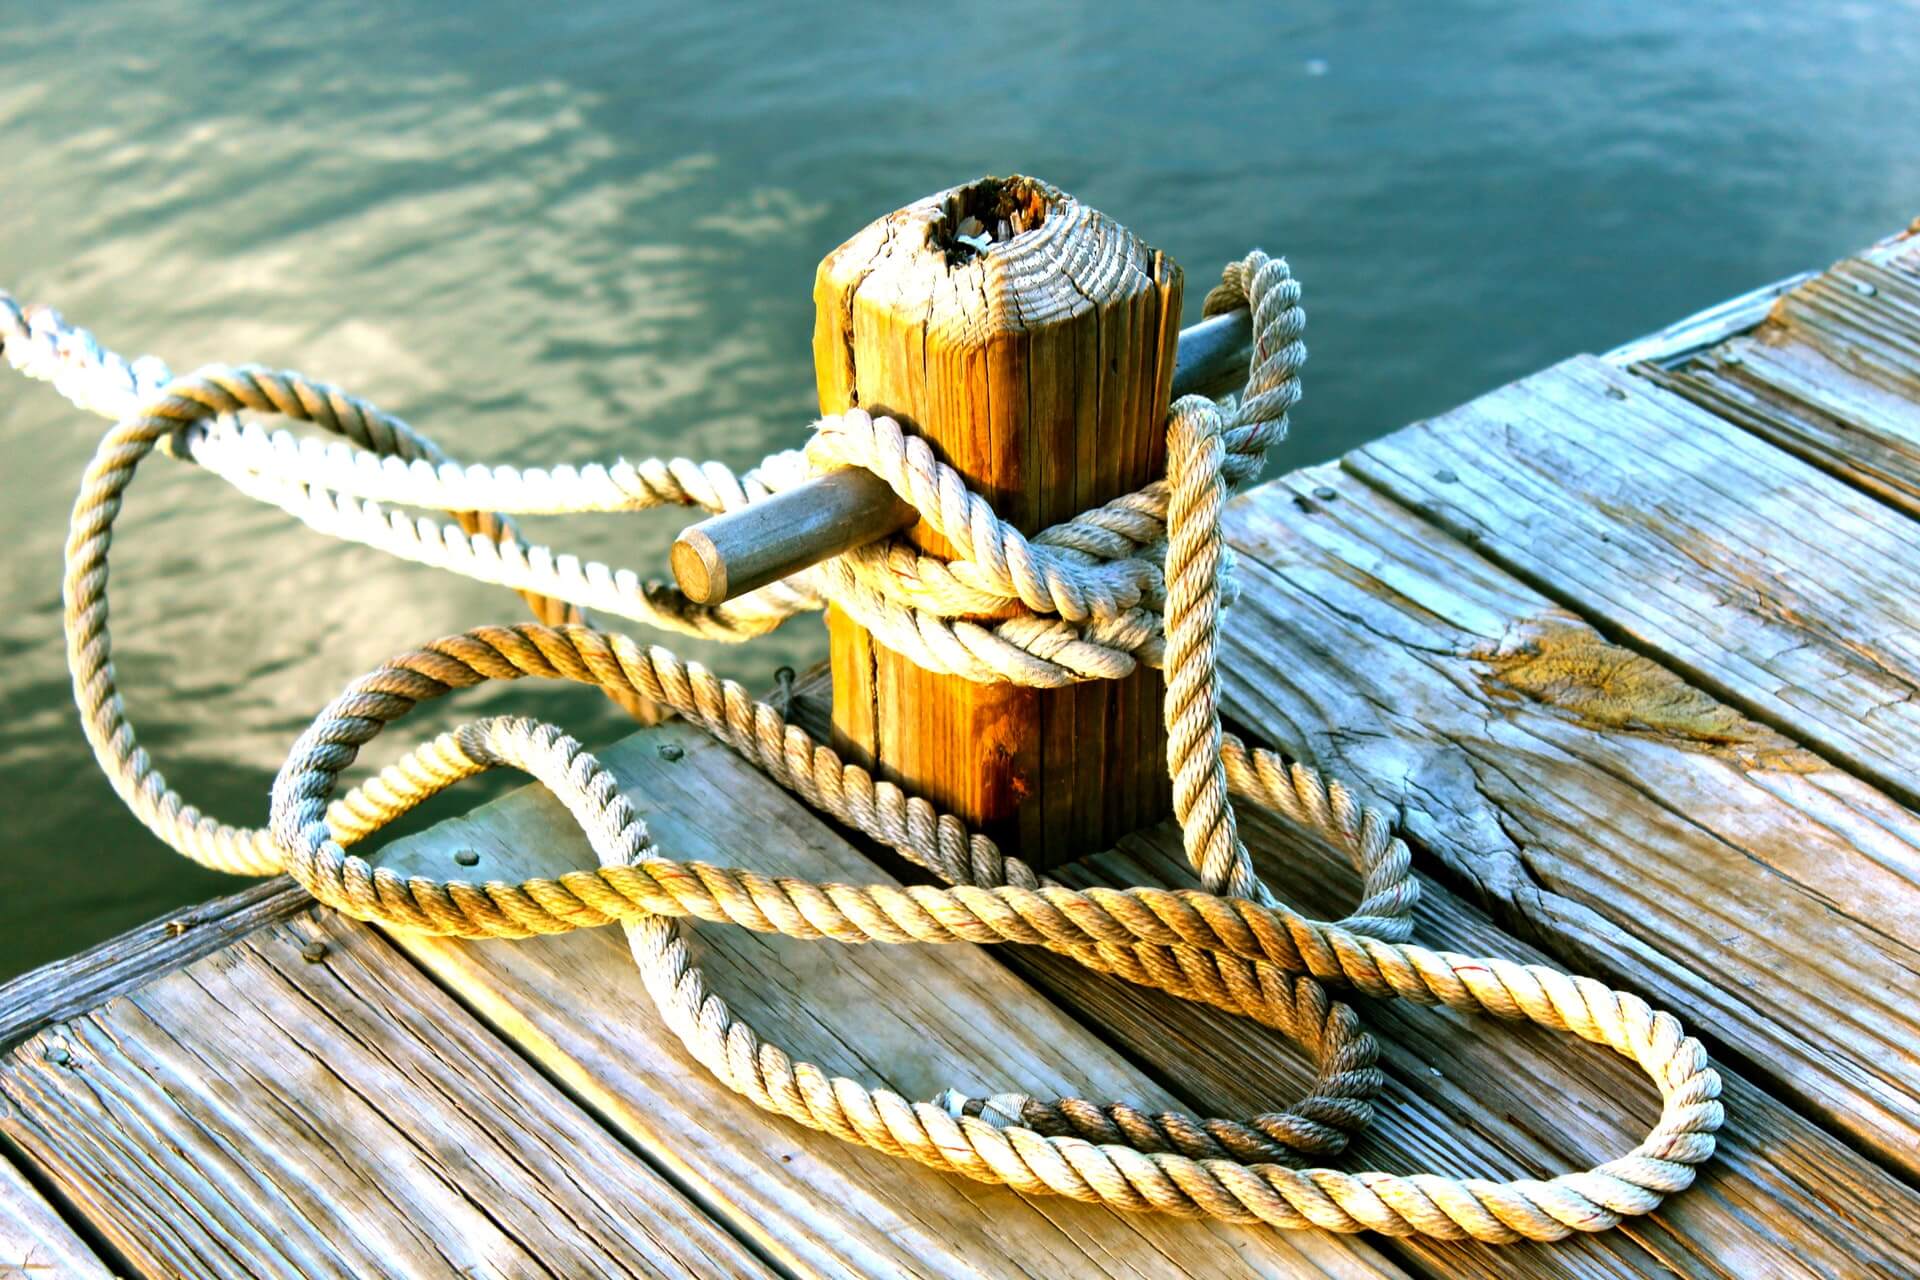 Rope being used to tie up a boat on a dock